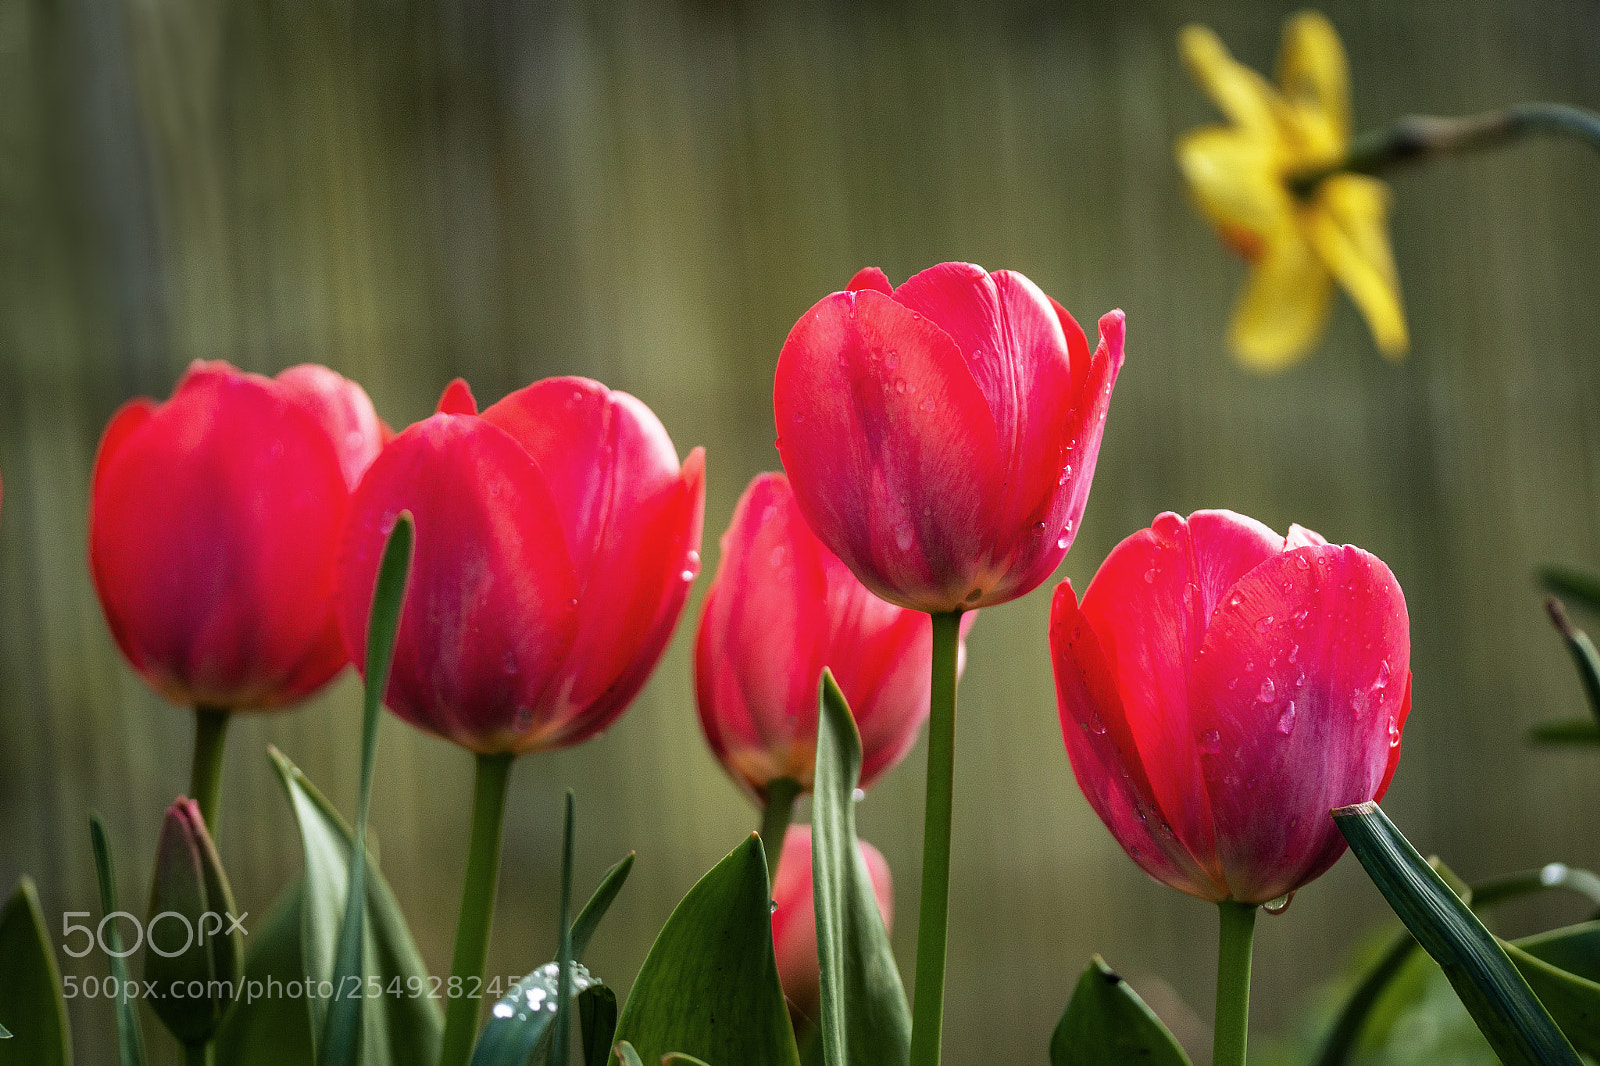 Sony a99 II sample photo. More tulips photography